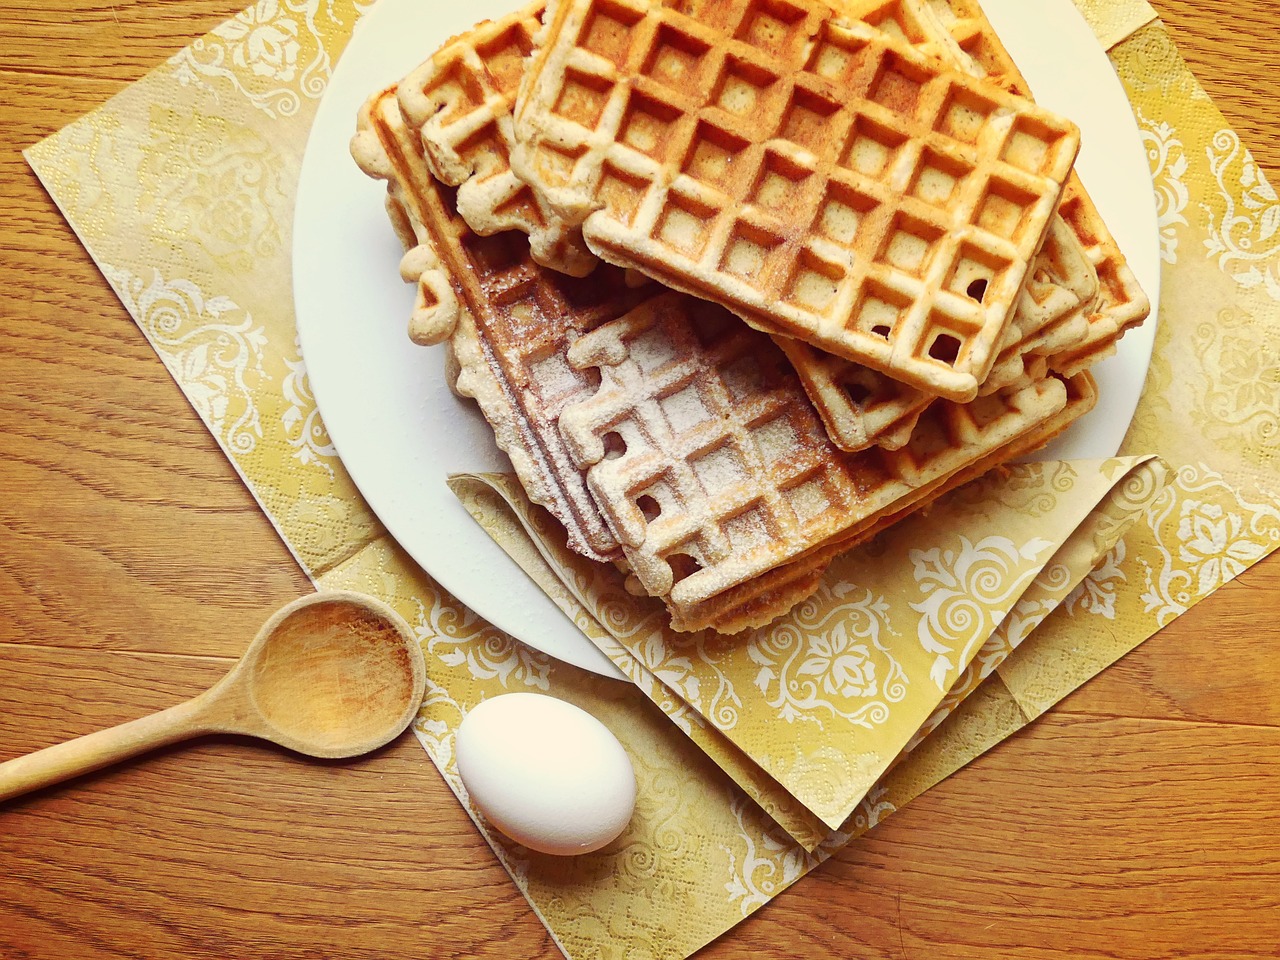 65+ Epic Waffle Slogans and Instagram Captions That Will Make You Hungry